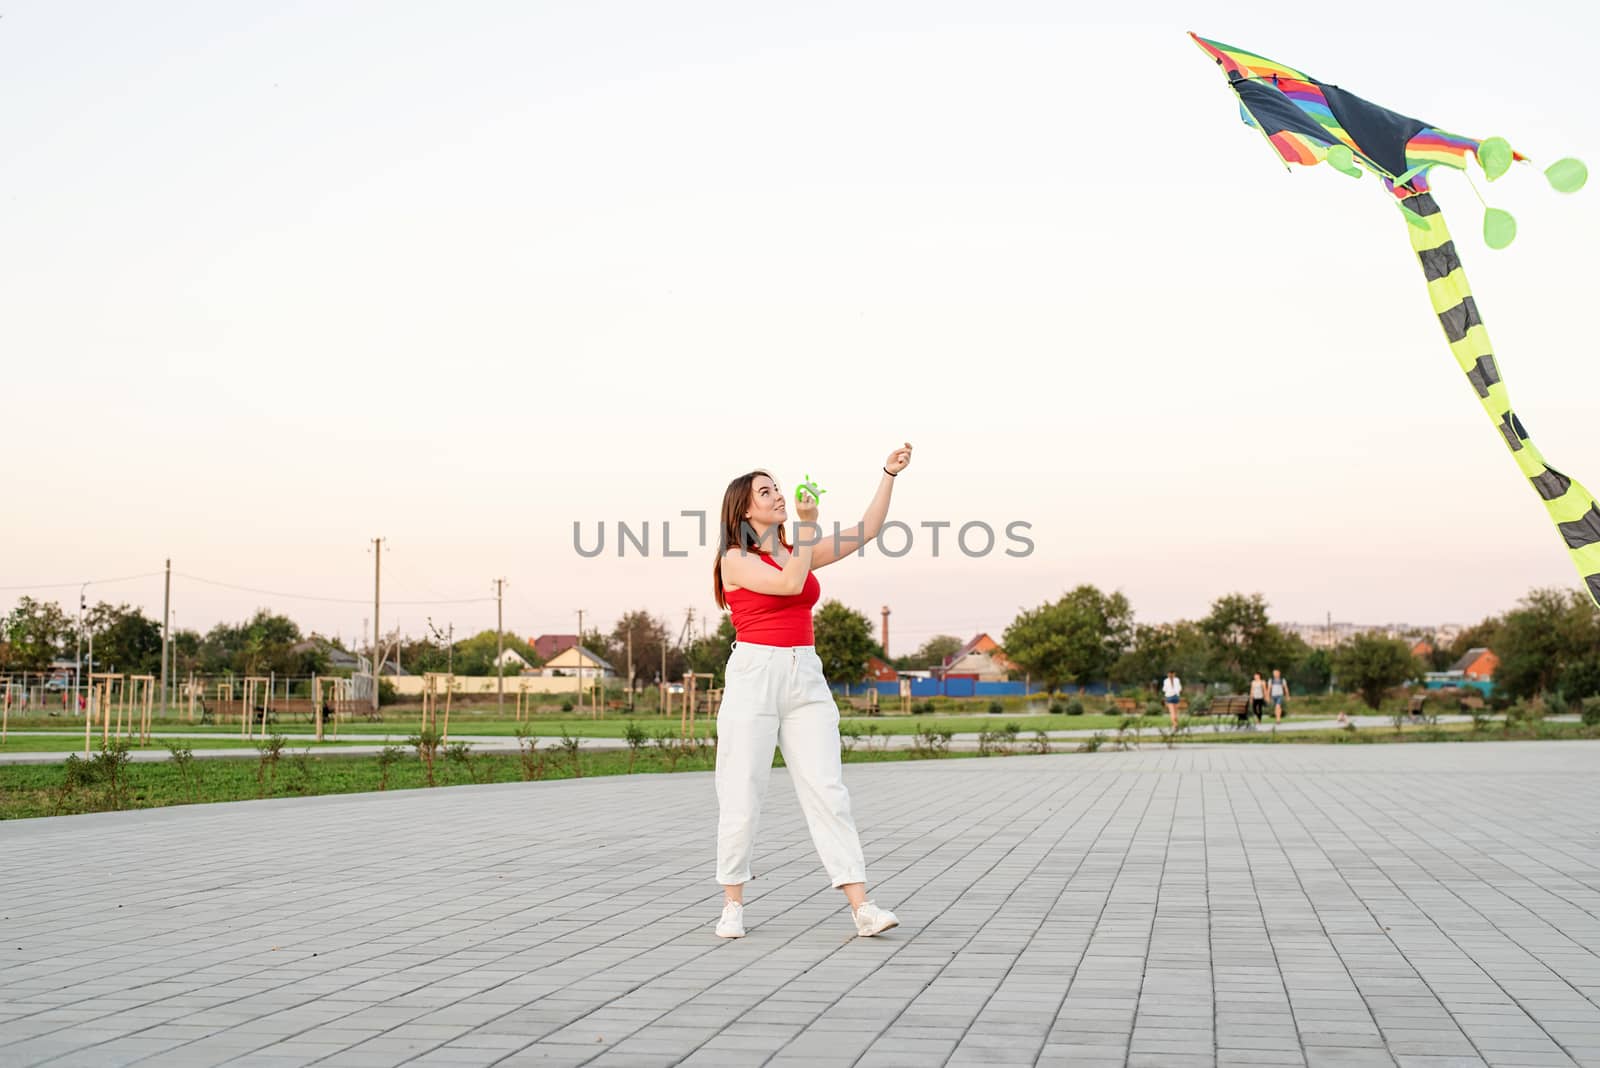 Young woman flying a kite in a public park at sunset by Desperada